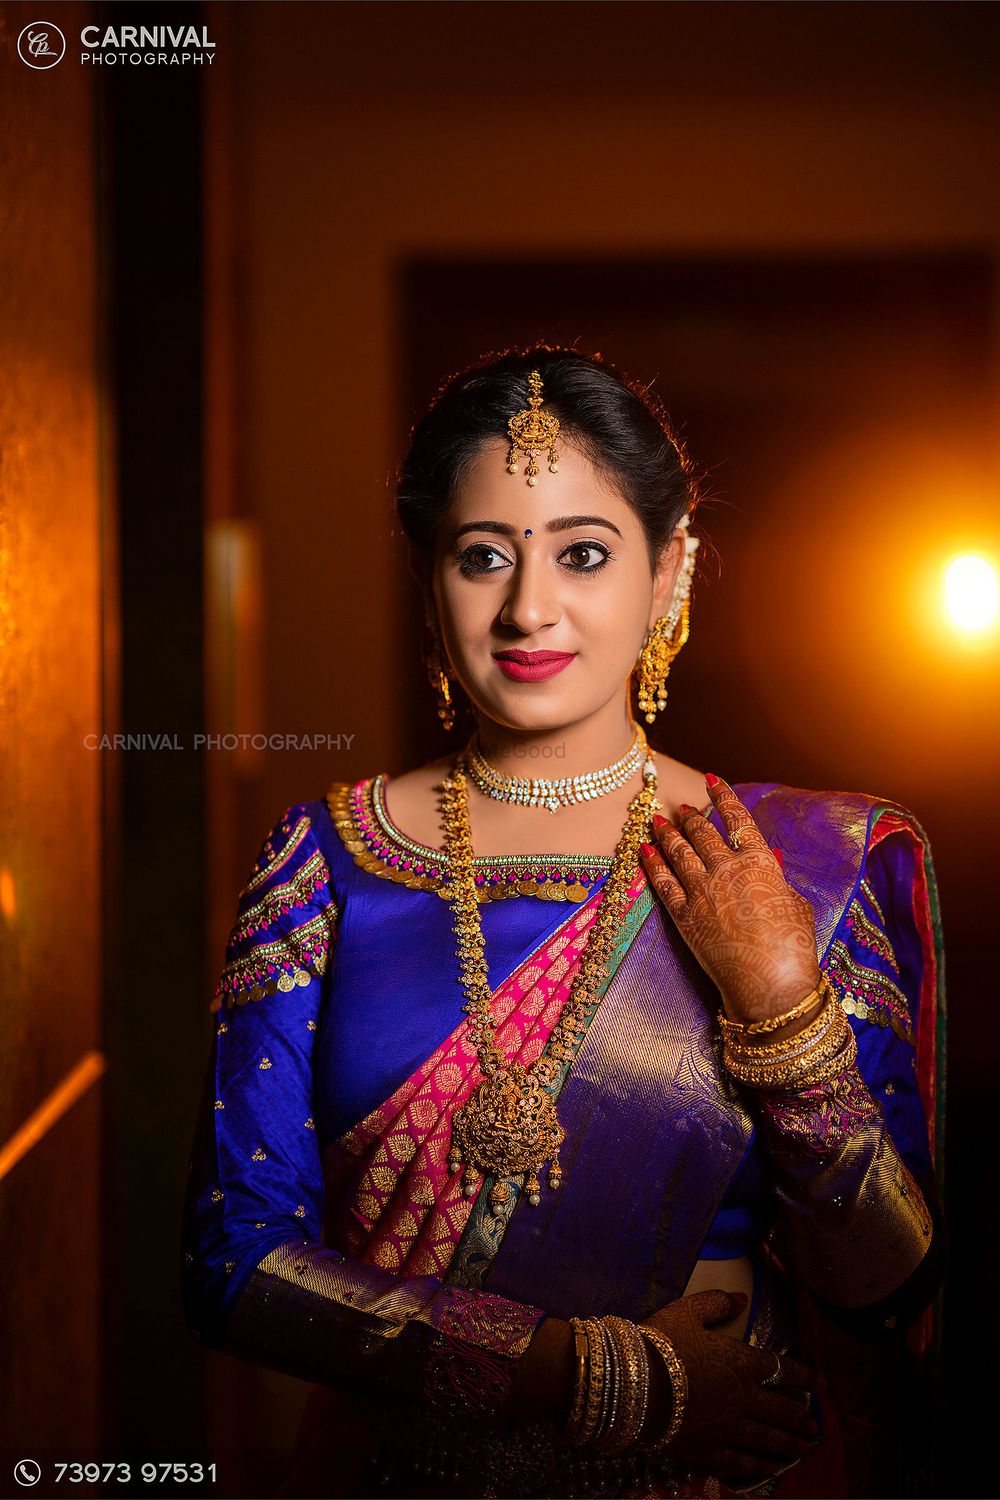 Photo of South Indian bride wearing a pink and blue saree.